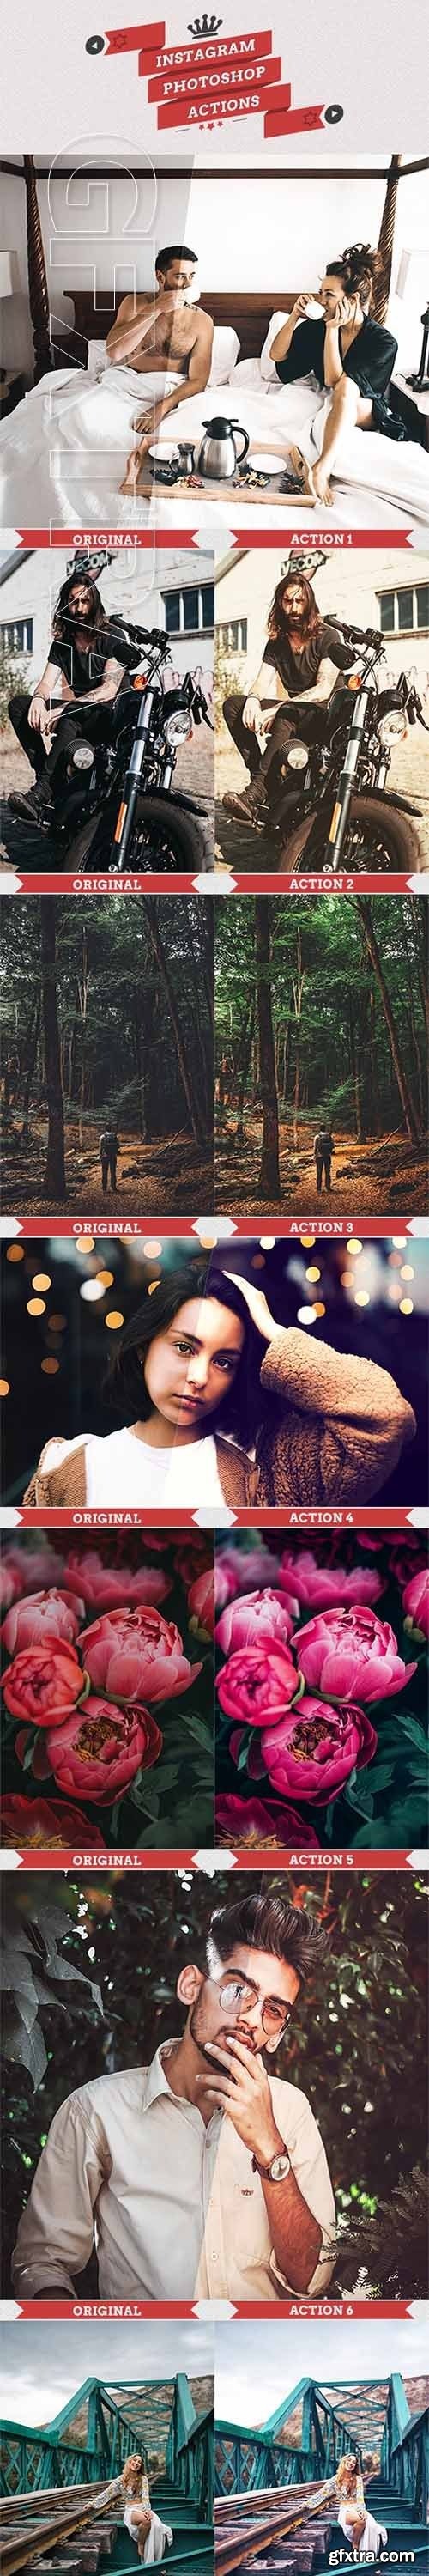 GraphicRiver - 25 Instagram Filters Photoshop Actions 22537324